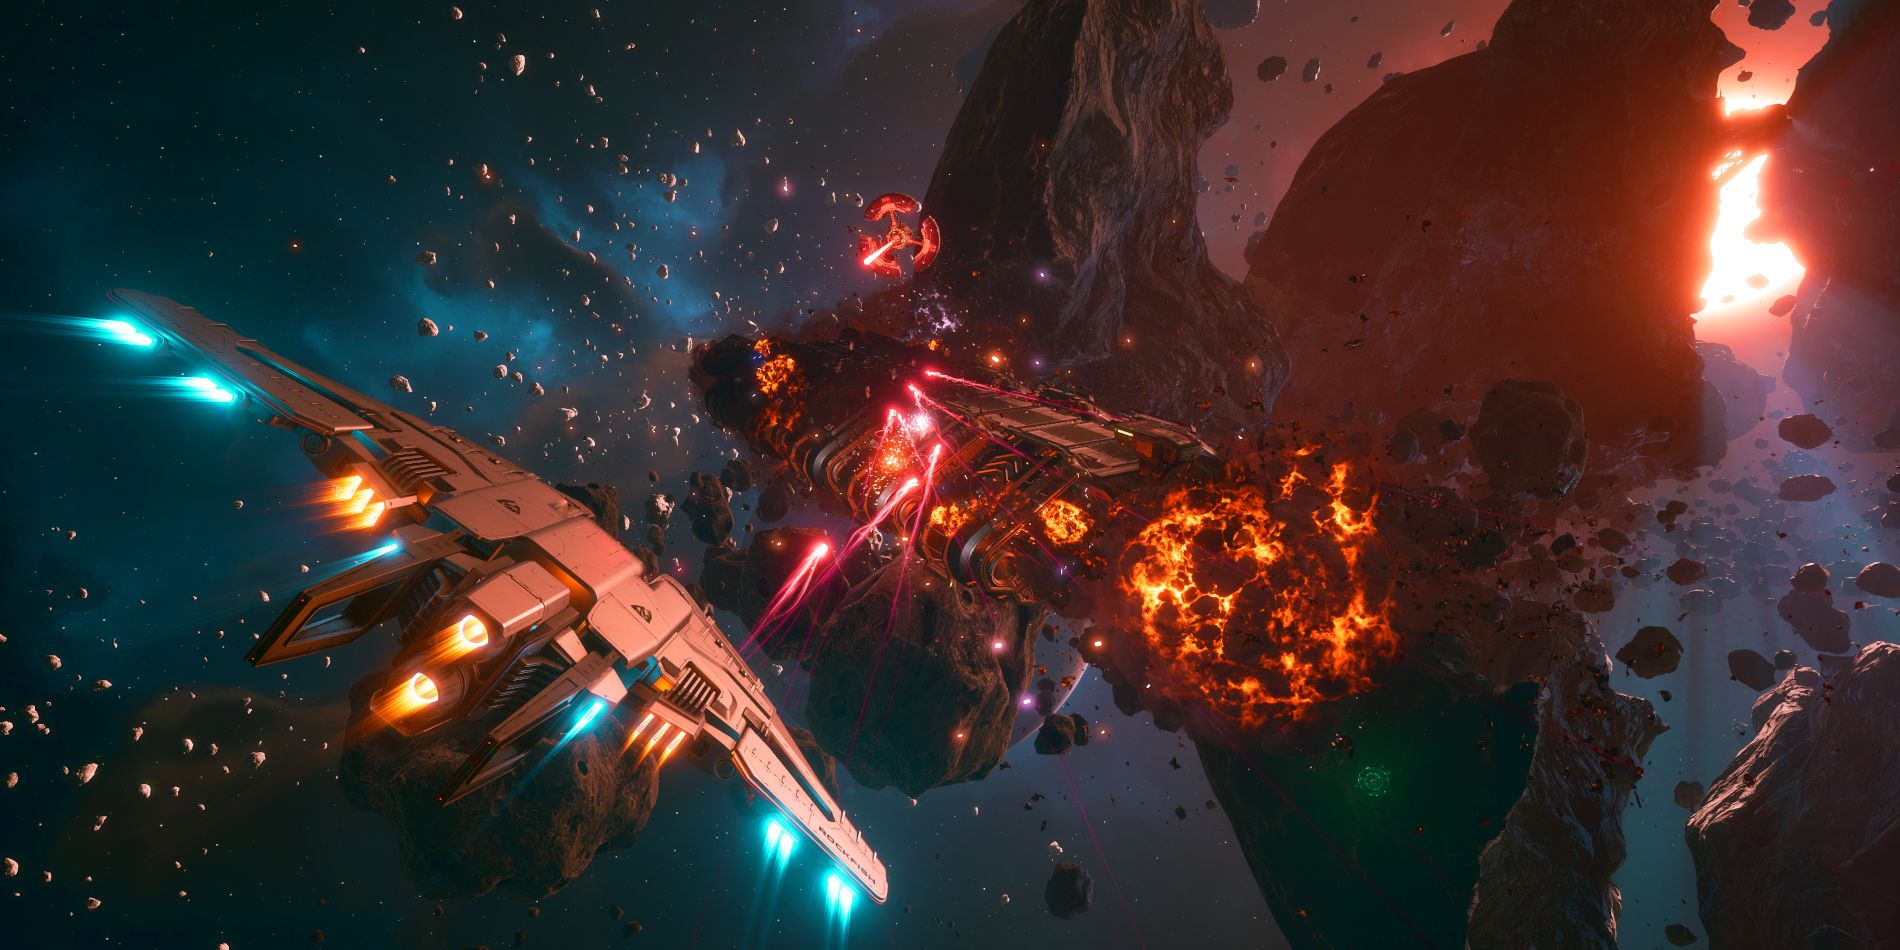 A screenshot of Everspace 2 shows the players ship boosting towards an exploding spacecraft while a star shines light through a collection of destroyed asteroids.